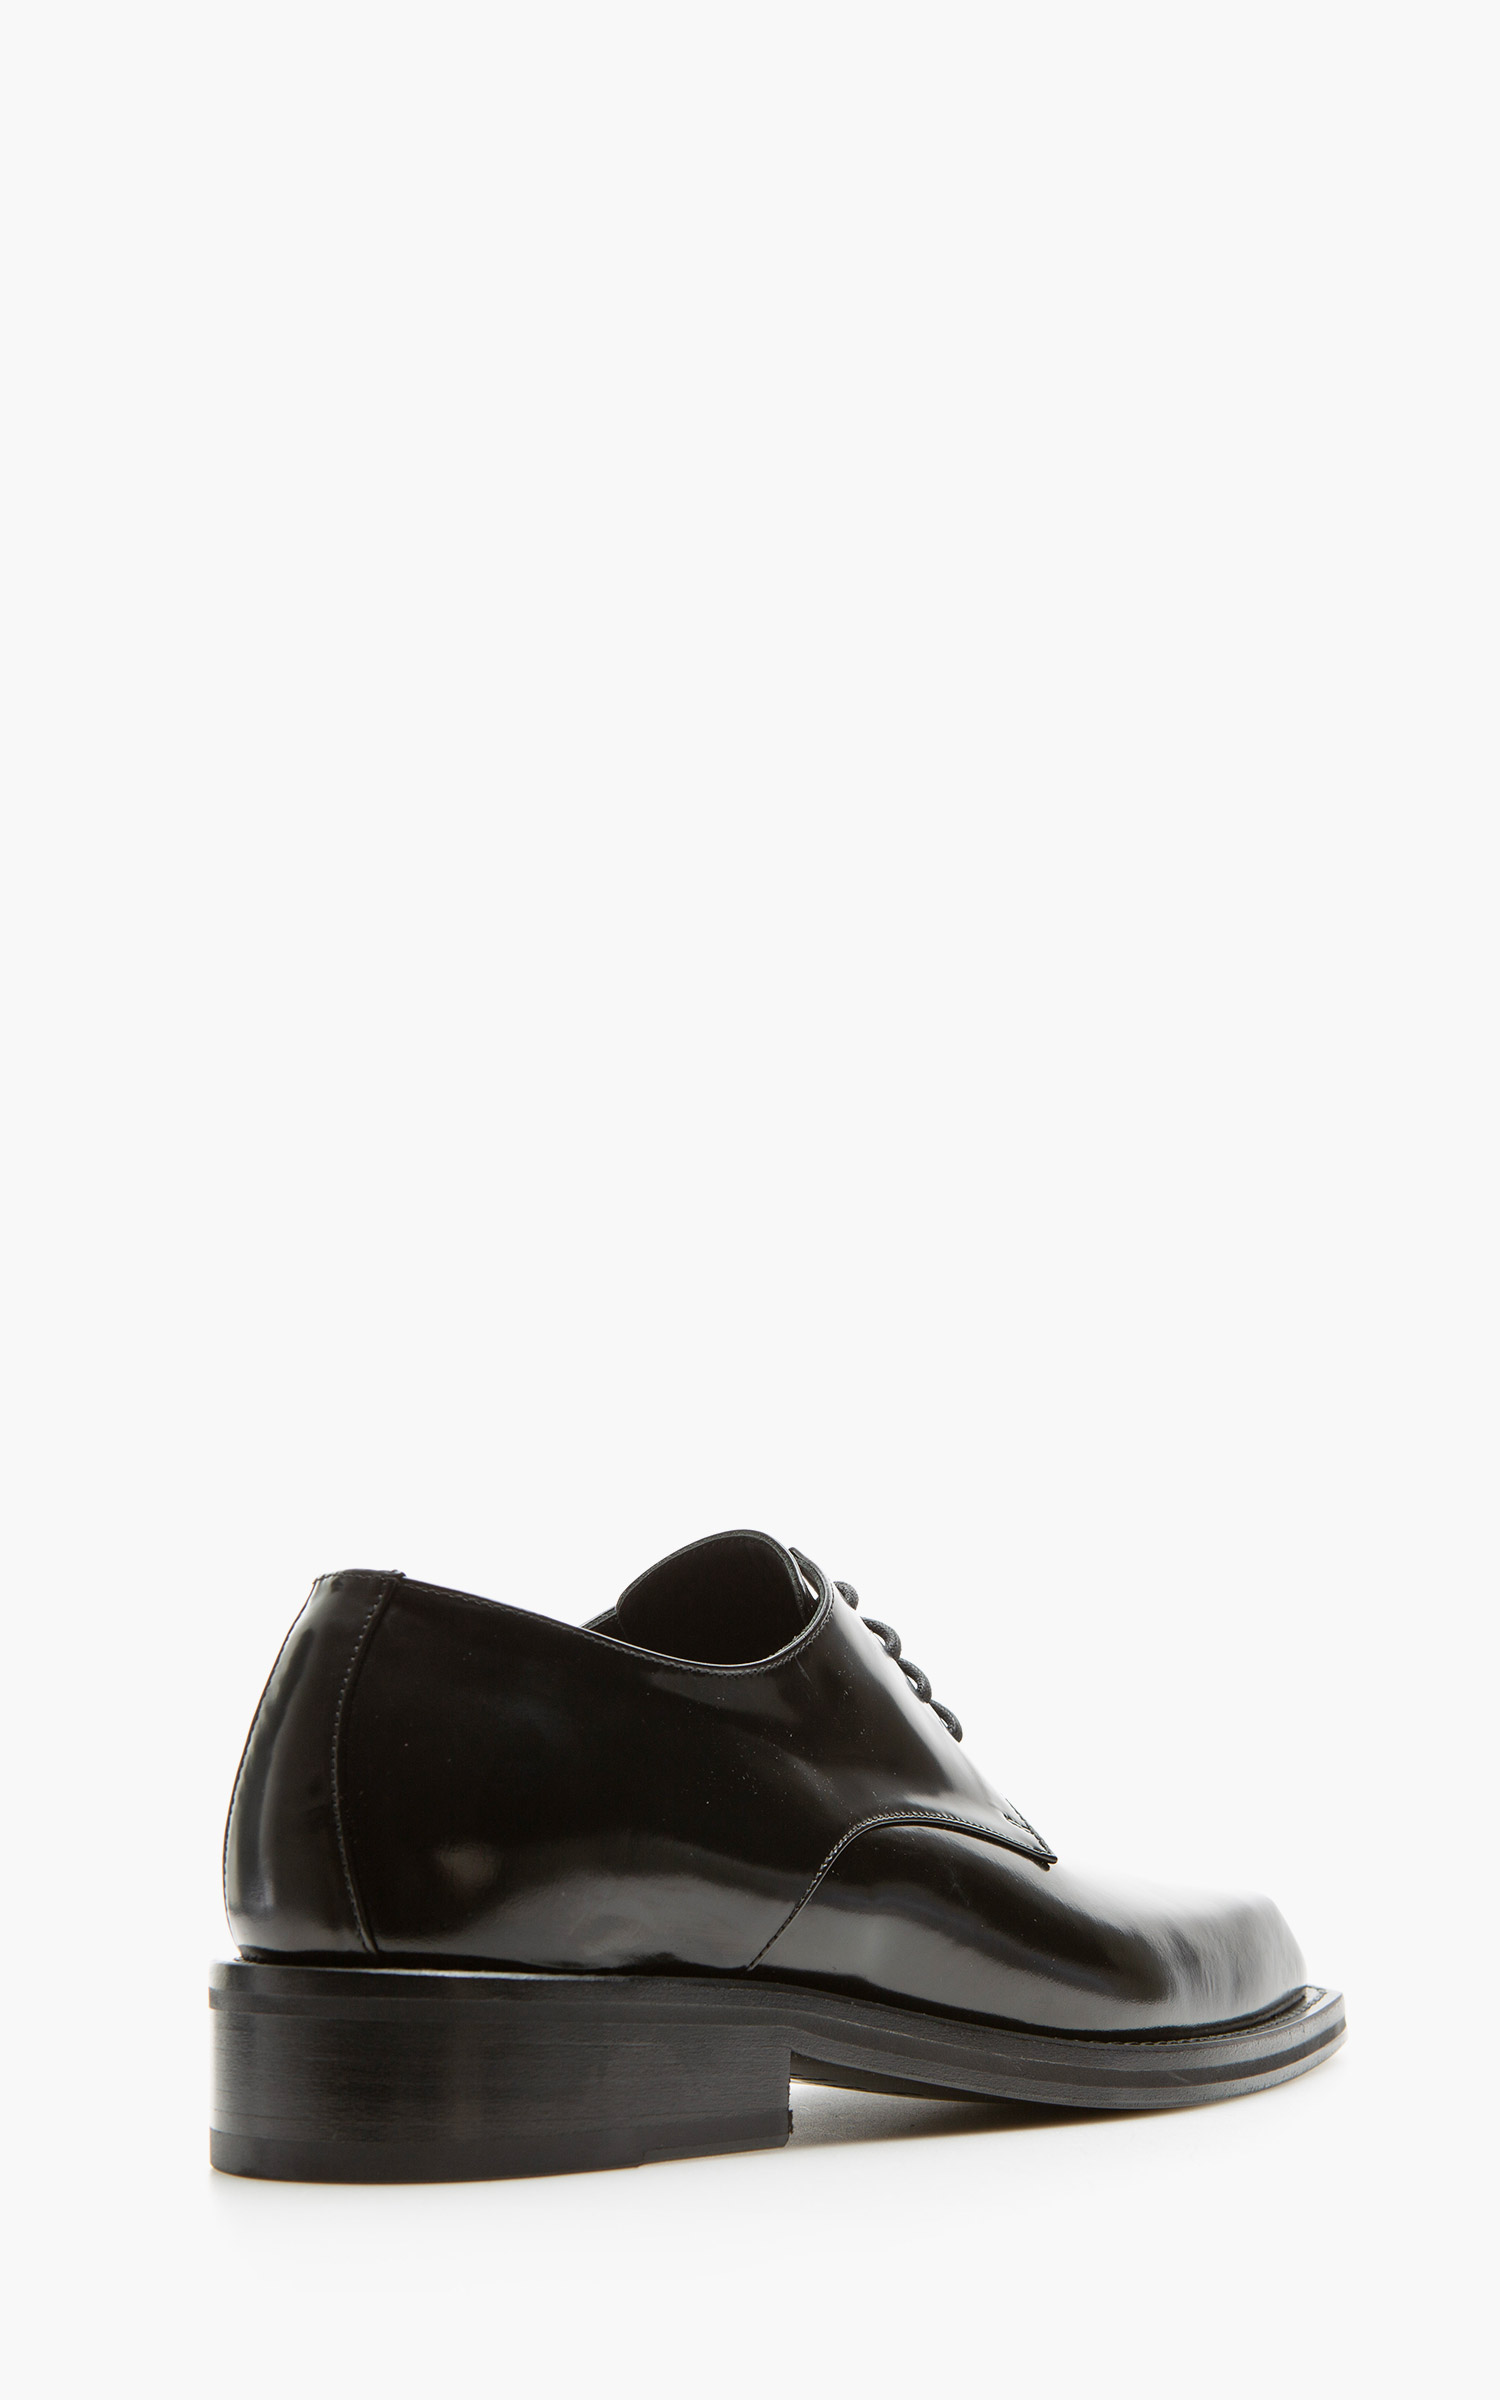 Martine Rose Chiesel Derby Toe Shoes Black | Cultizm